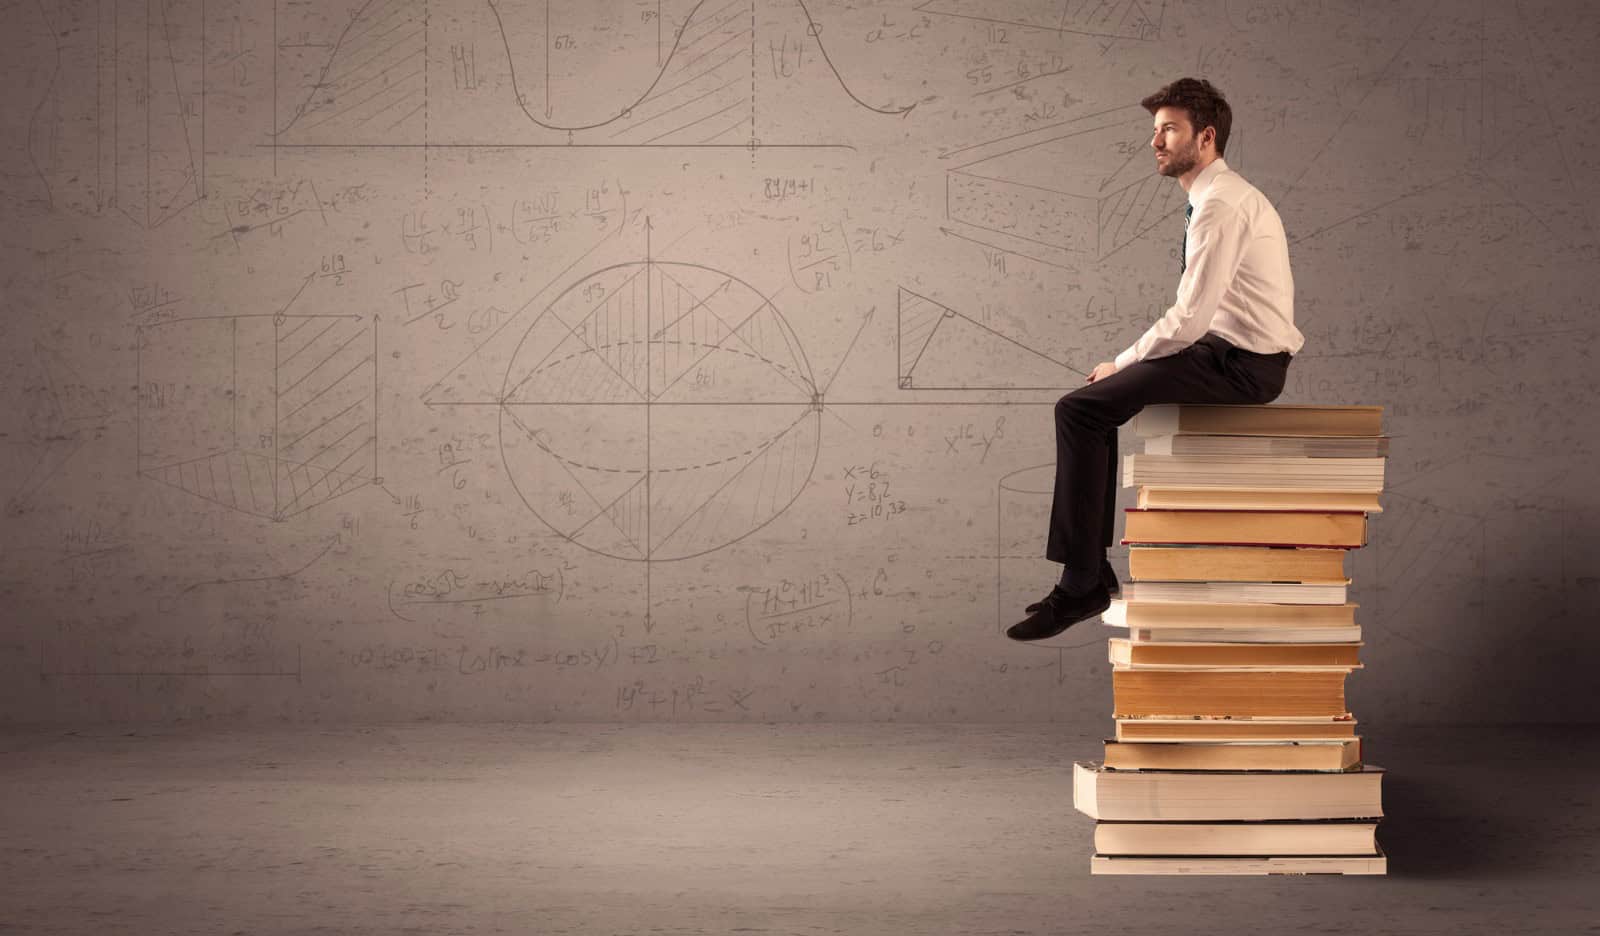 actuarial student sitting on books - Actuarial Exam Study Techniques